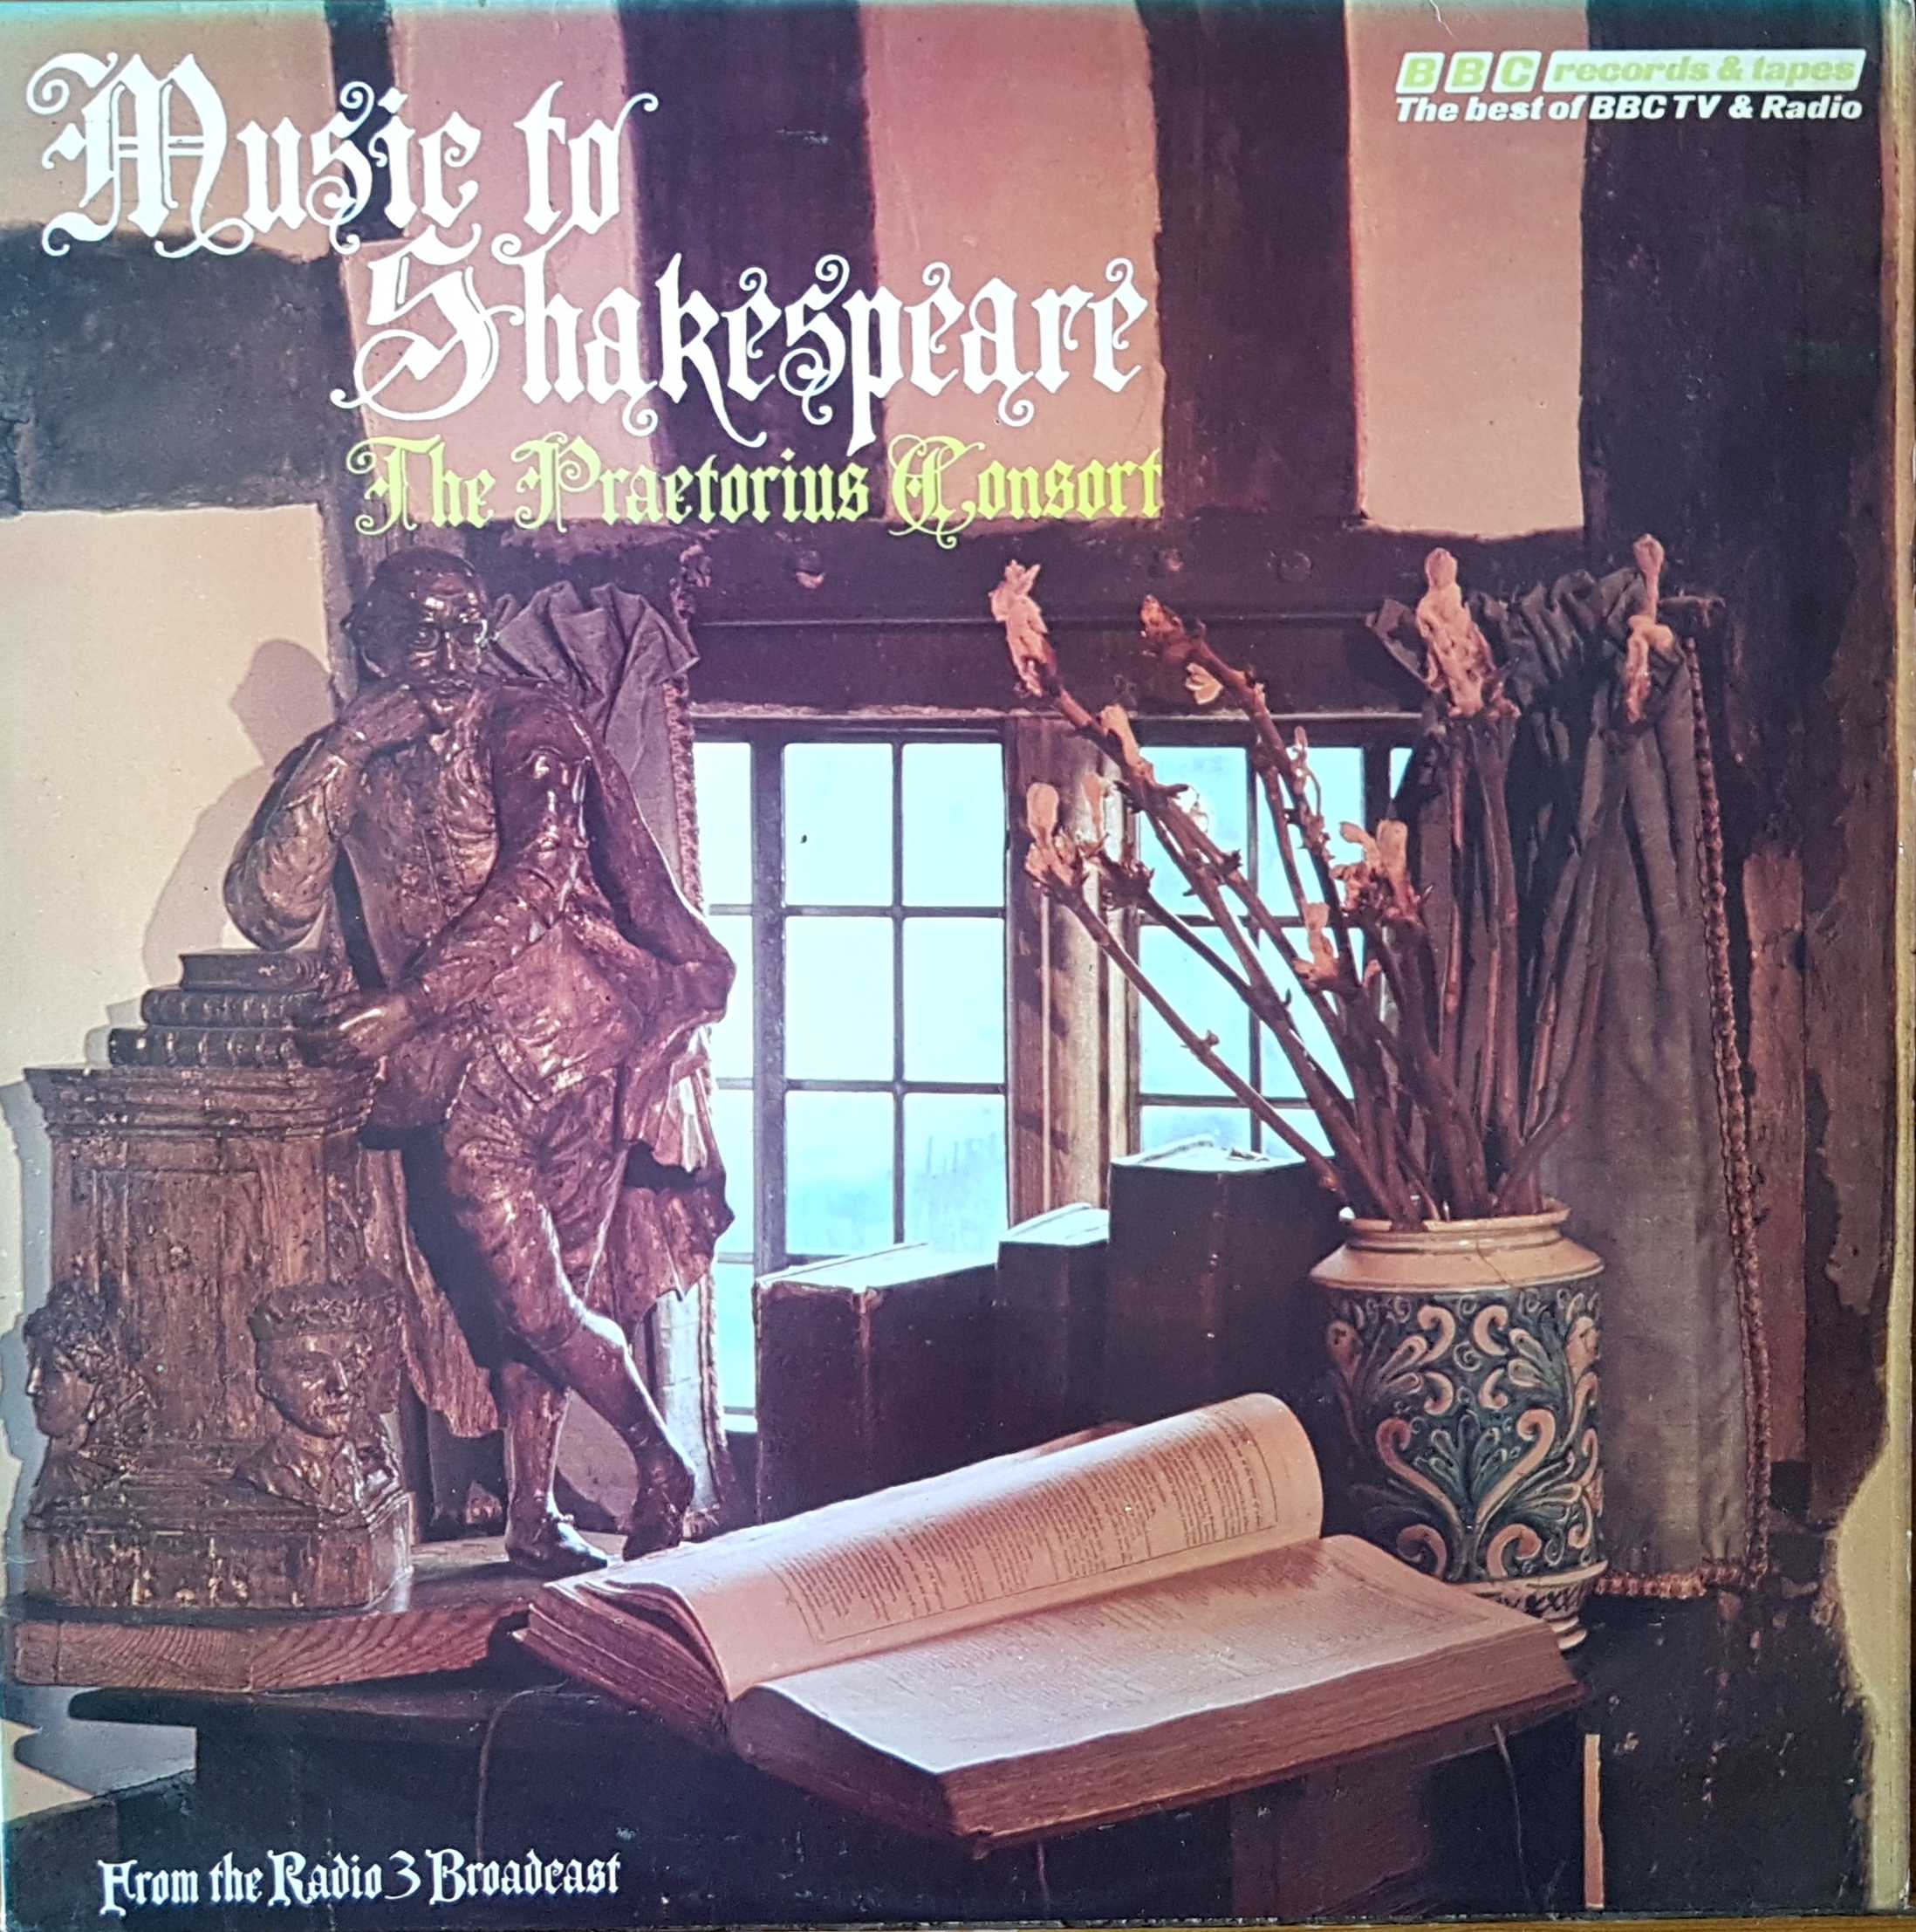 Picture of REB 191 Music to Shakespeare by artist The Praetorius Consort from the BBC albums - Records and Tapes library